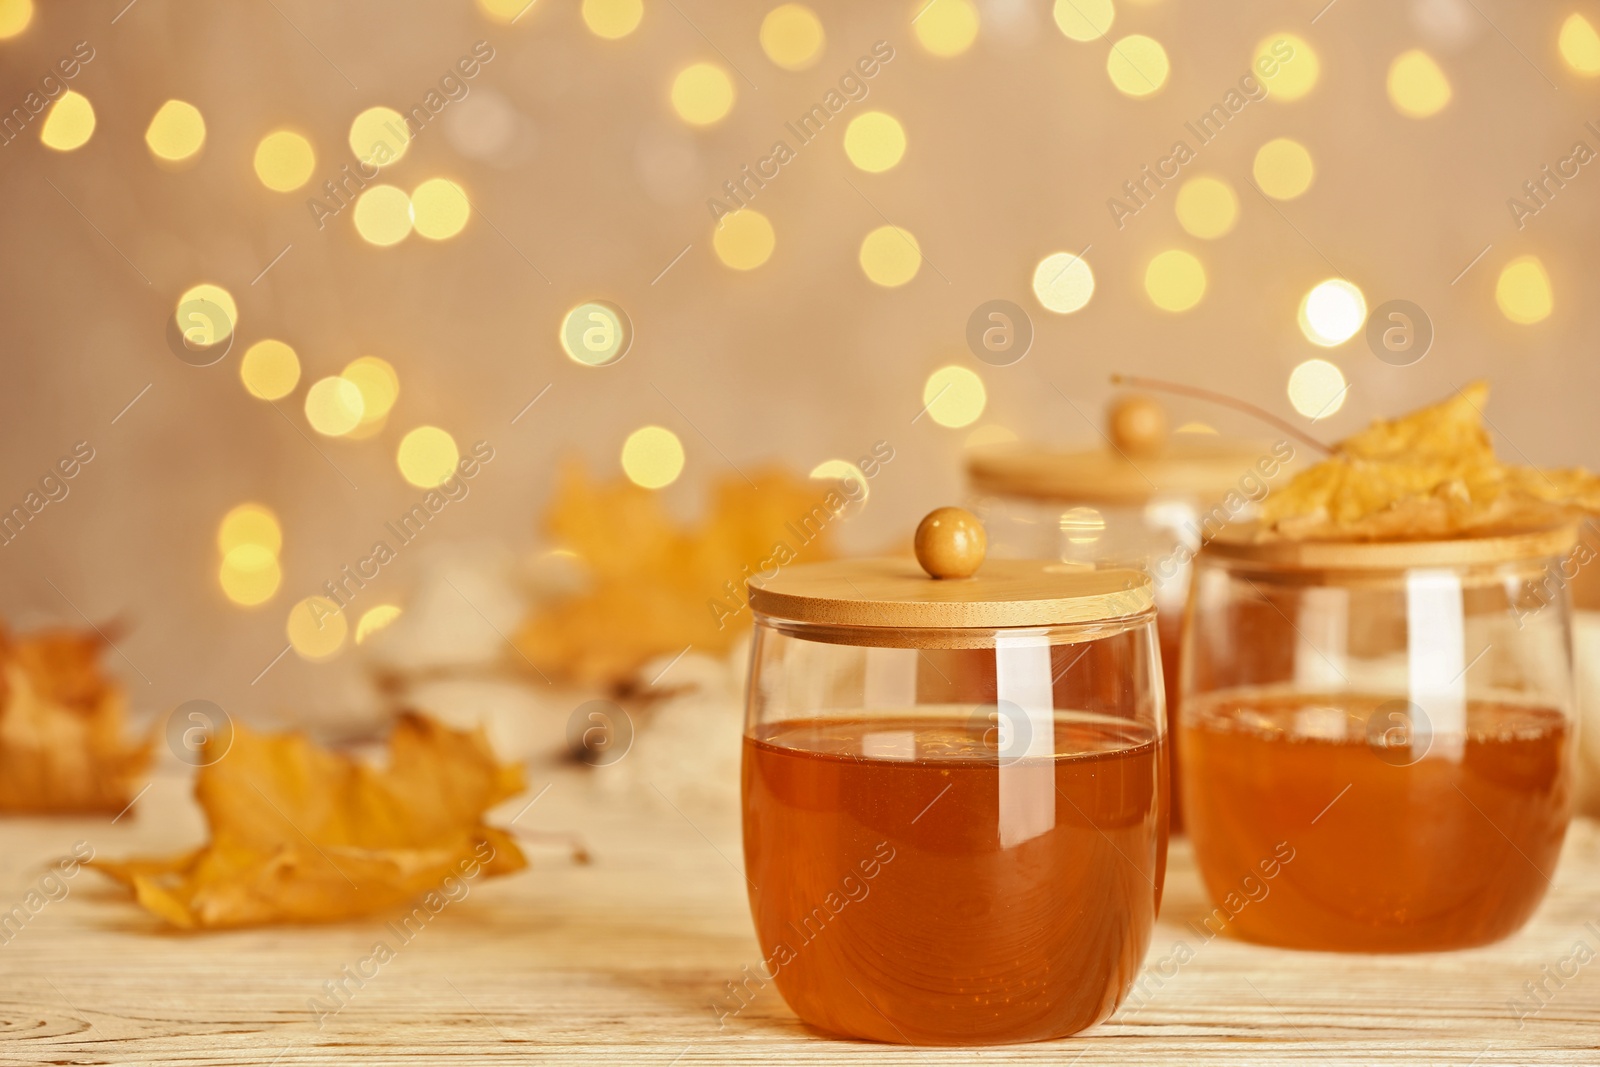 Photo of Glass jars with sweet honey on table against blurred lights. Space for text